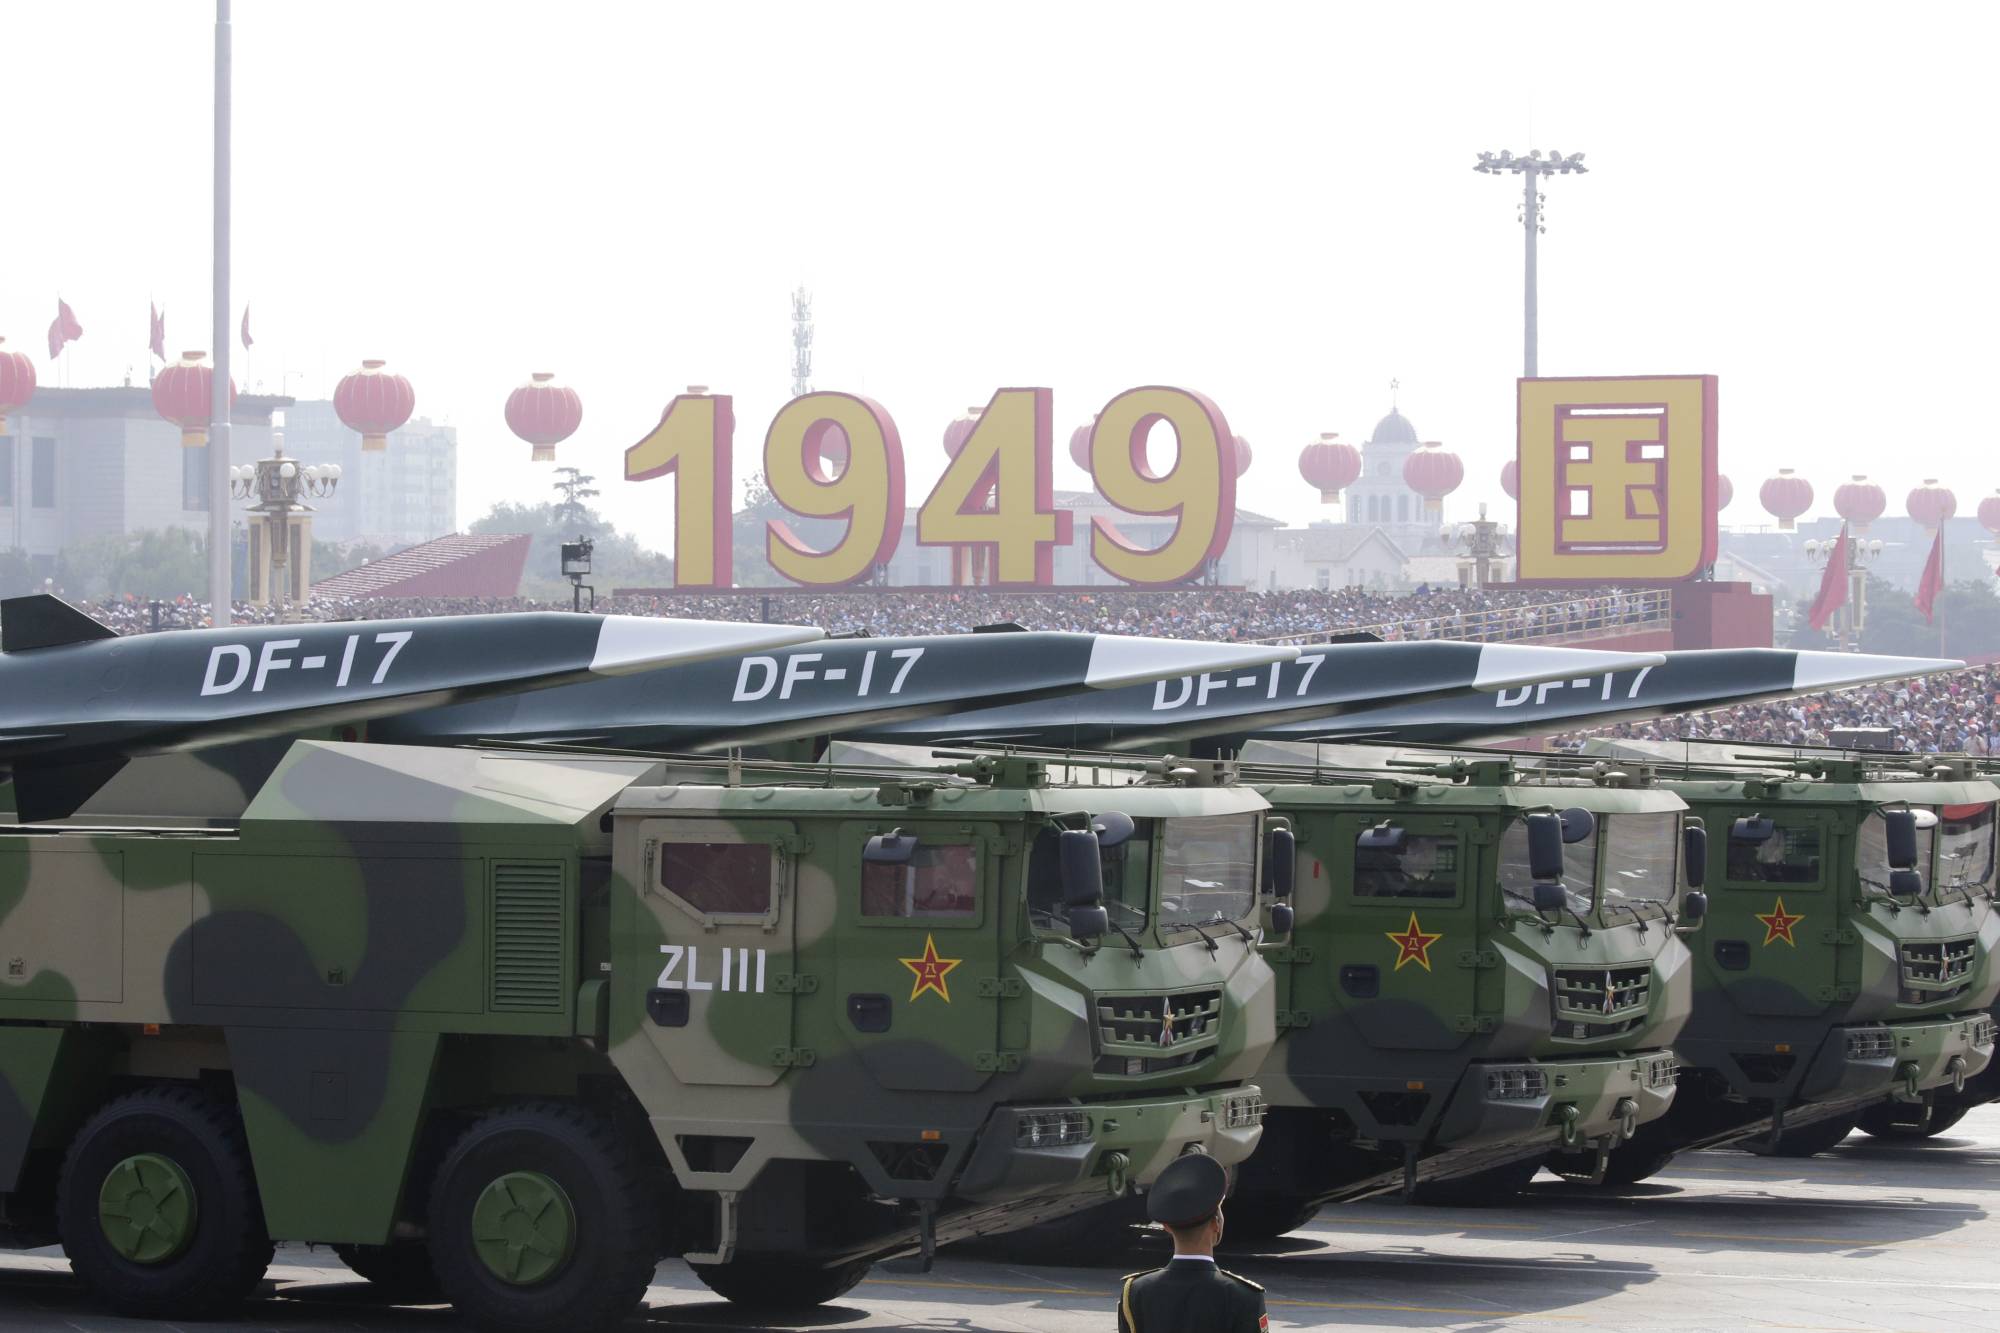 Military vehicles carrying hypersonic DF-17 missiles travel past Beijing's Tiananmen Square during a military parade on Oct. 1, 2019, marking the 70th founding anniversary of People's Republic of China. | REUTERS